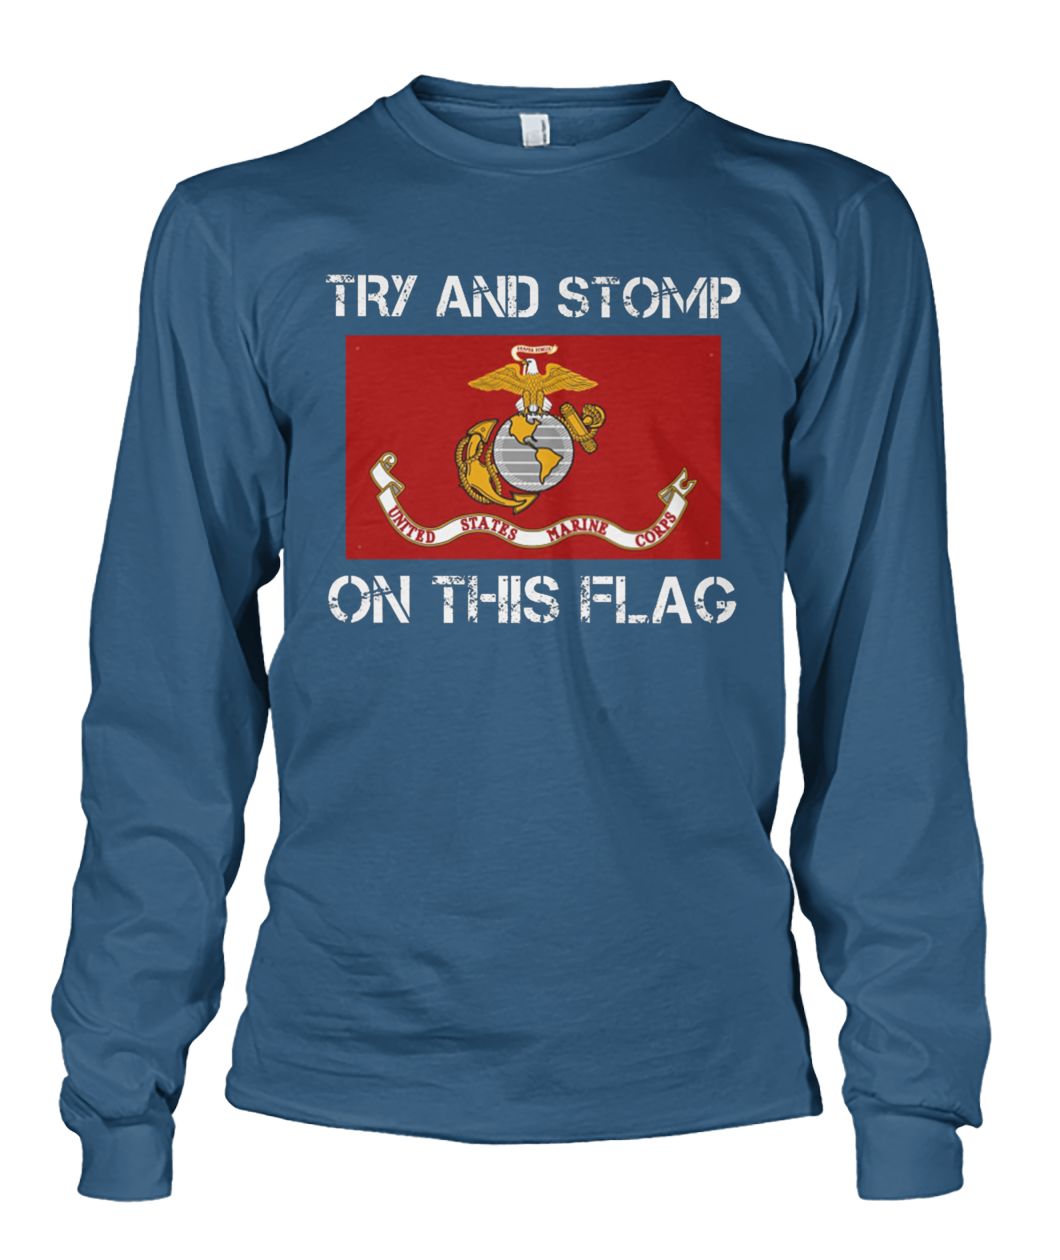 Try and stomp on this flag united states marine corps flag unisex long sleeve